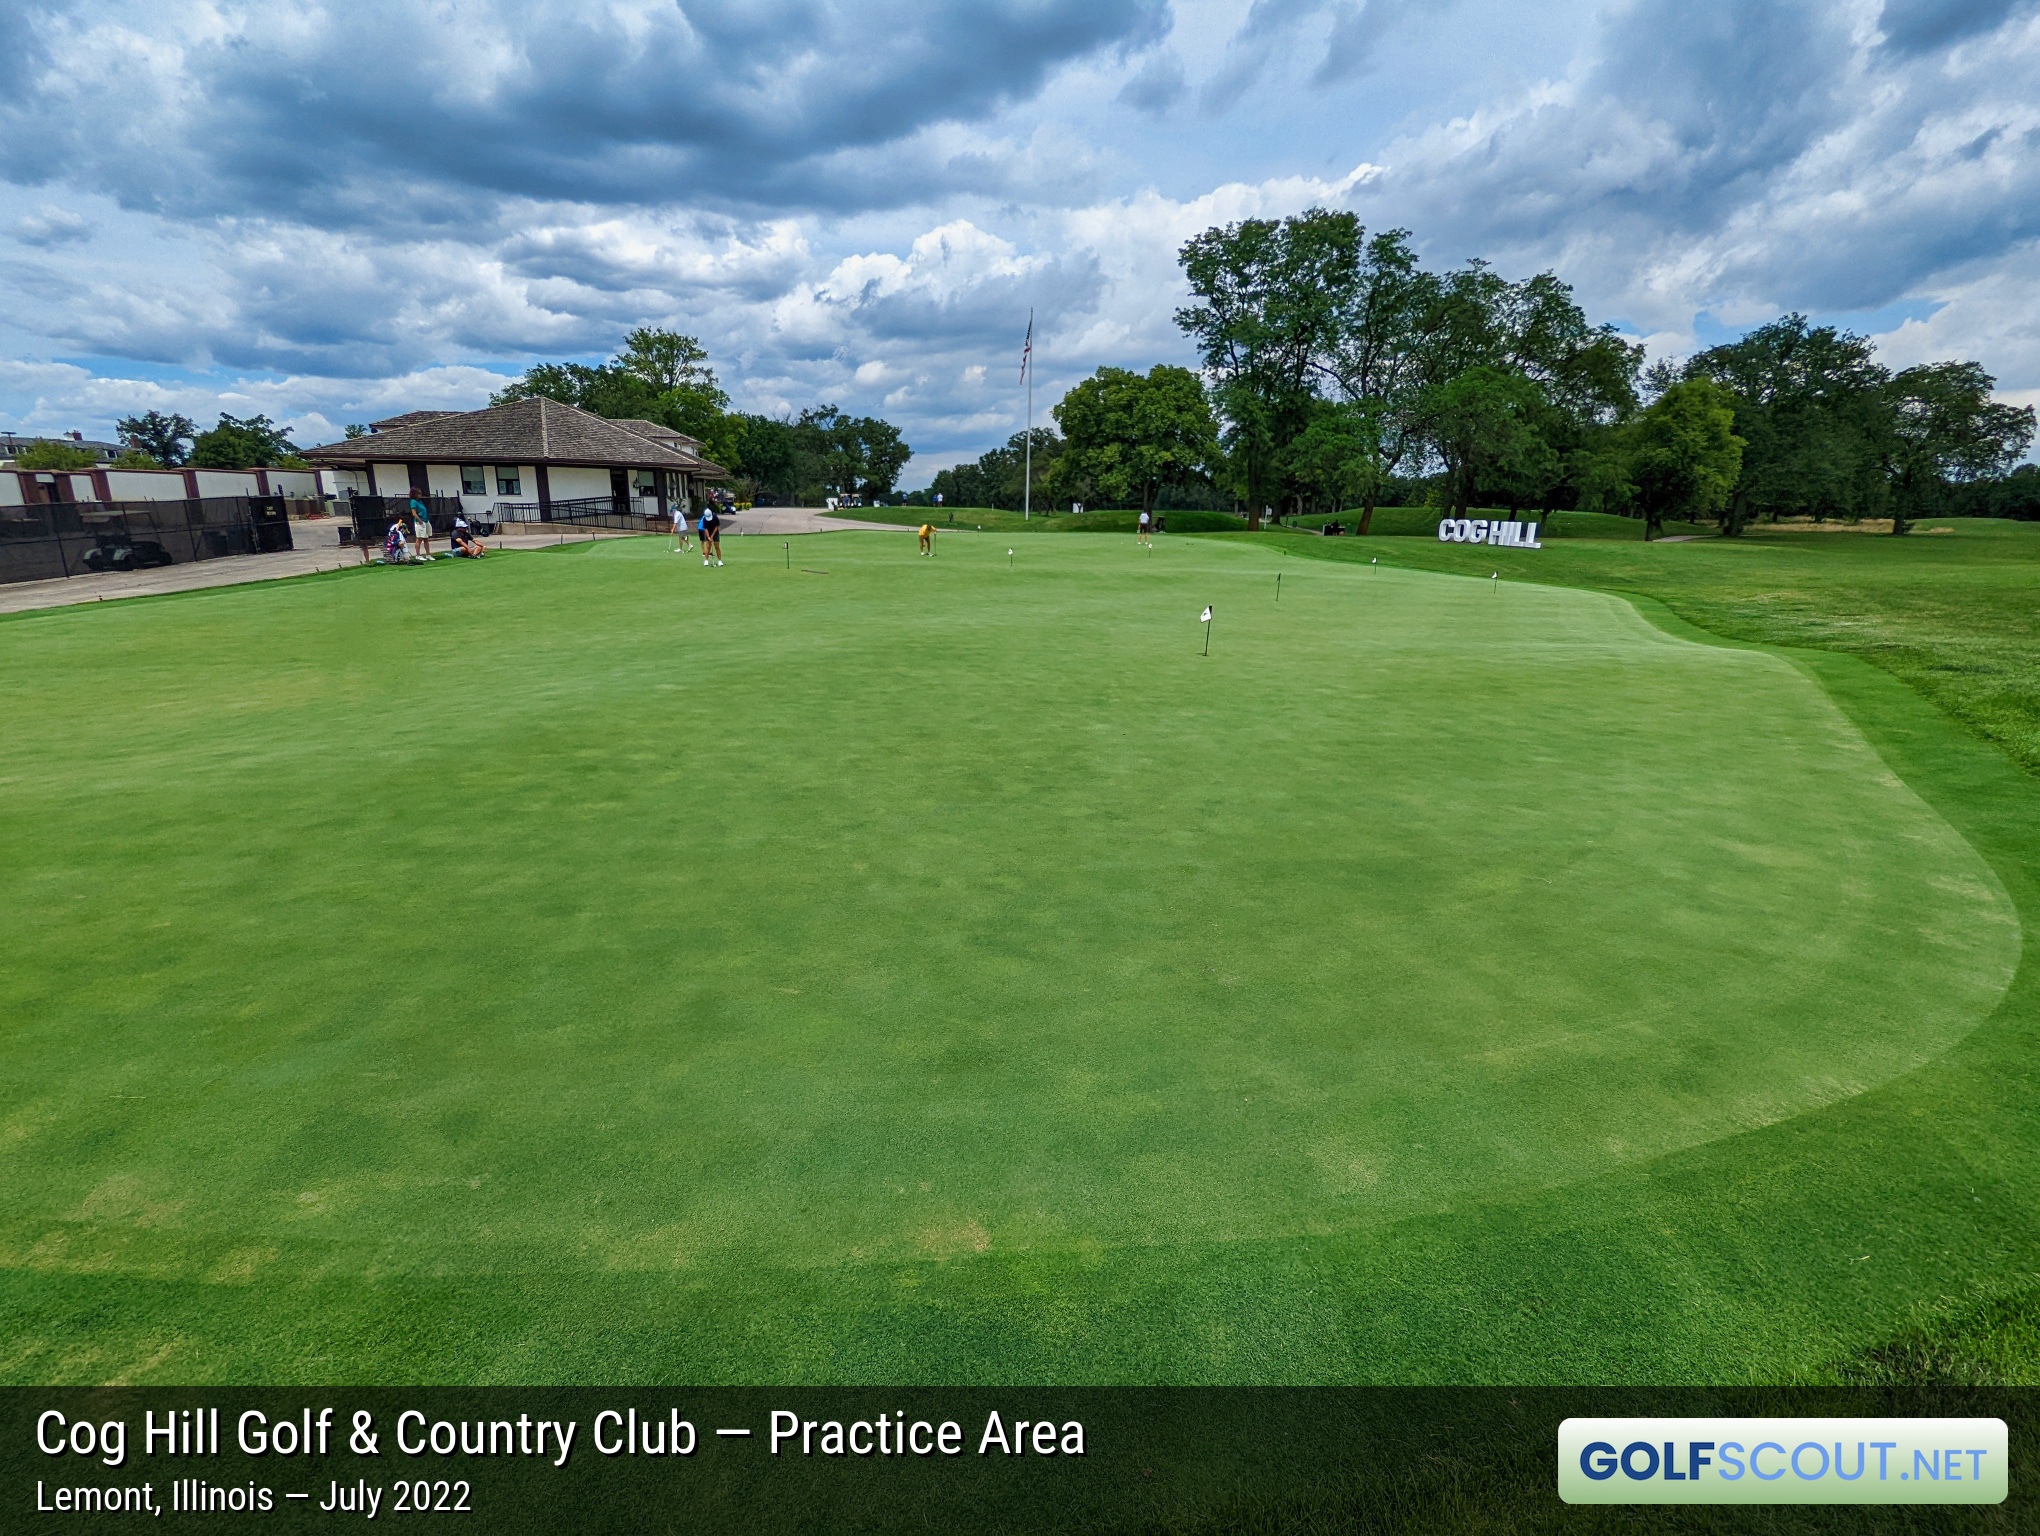 Photo of the practice area at Cog Hill Course #4 - Dubsdread in Lemont, Illinois. This is the enormous putting green dedicated to courses 2 and 4.